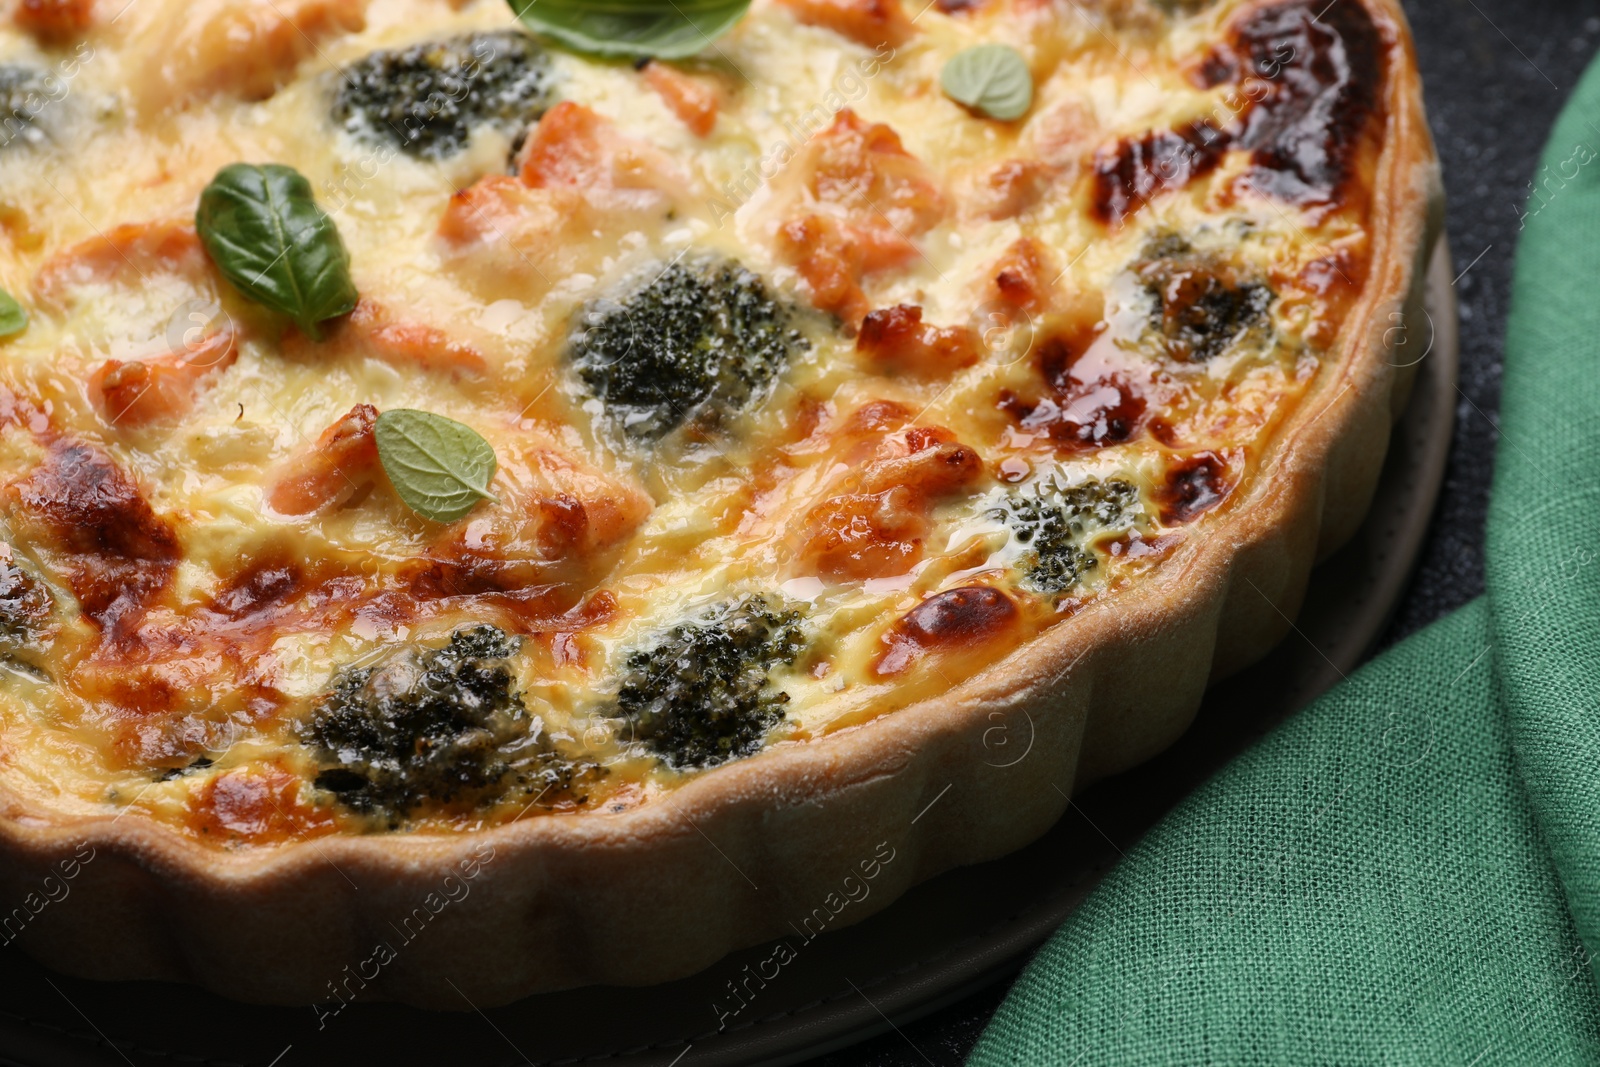 Photo of Delicious homemade quiche with salmon and broccoli on table, closeup